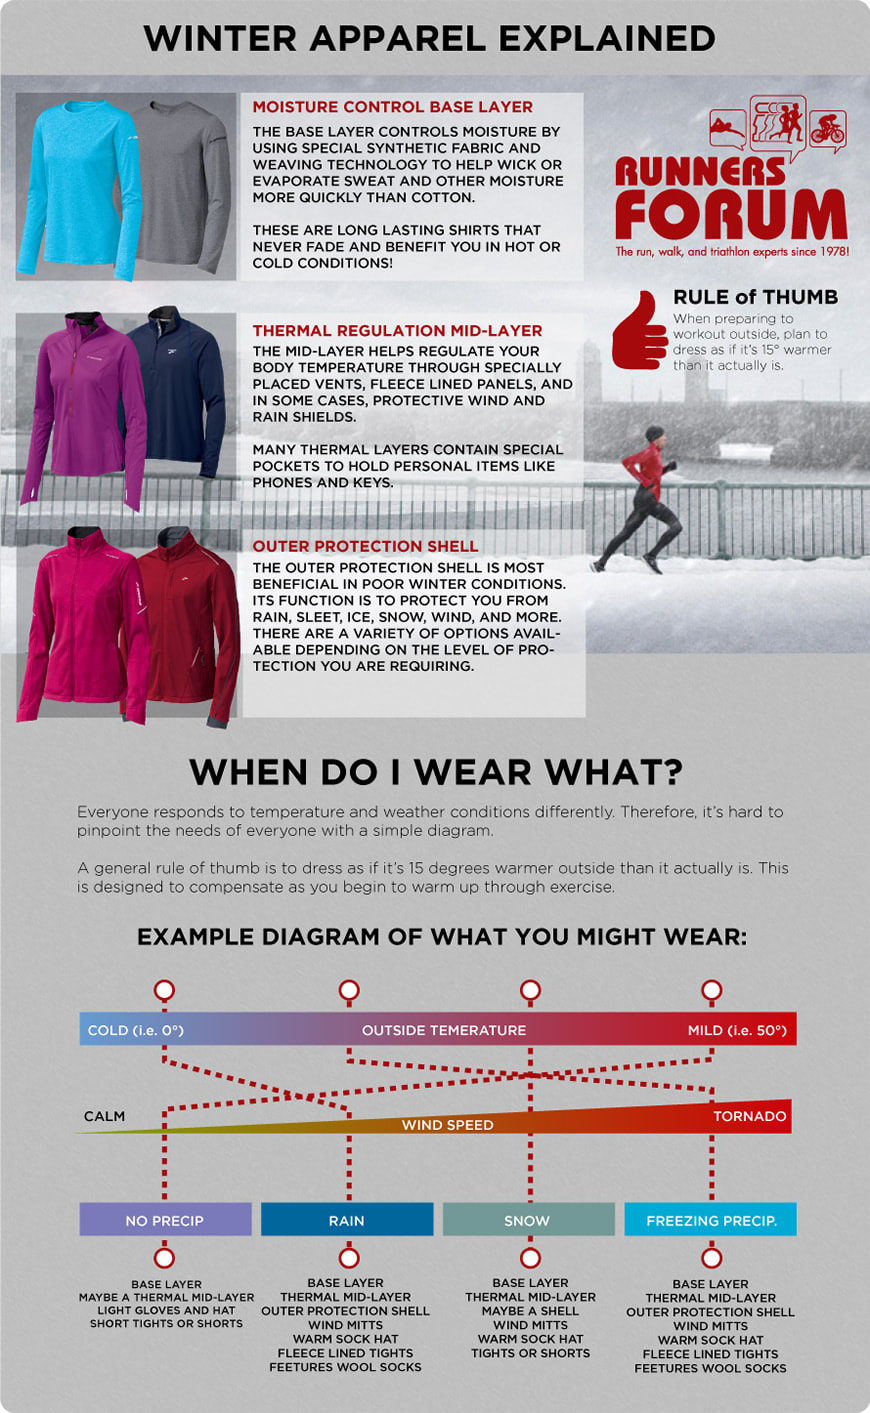 How to Dress for Winter Training - The Runners Forum